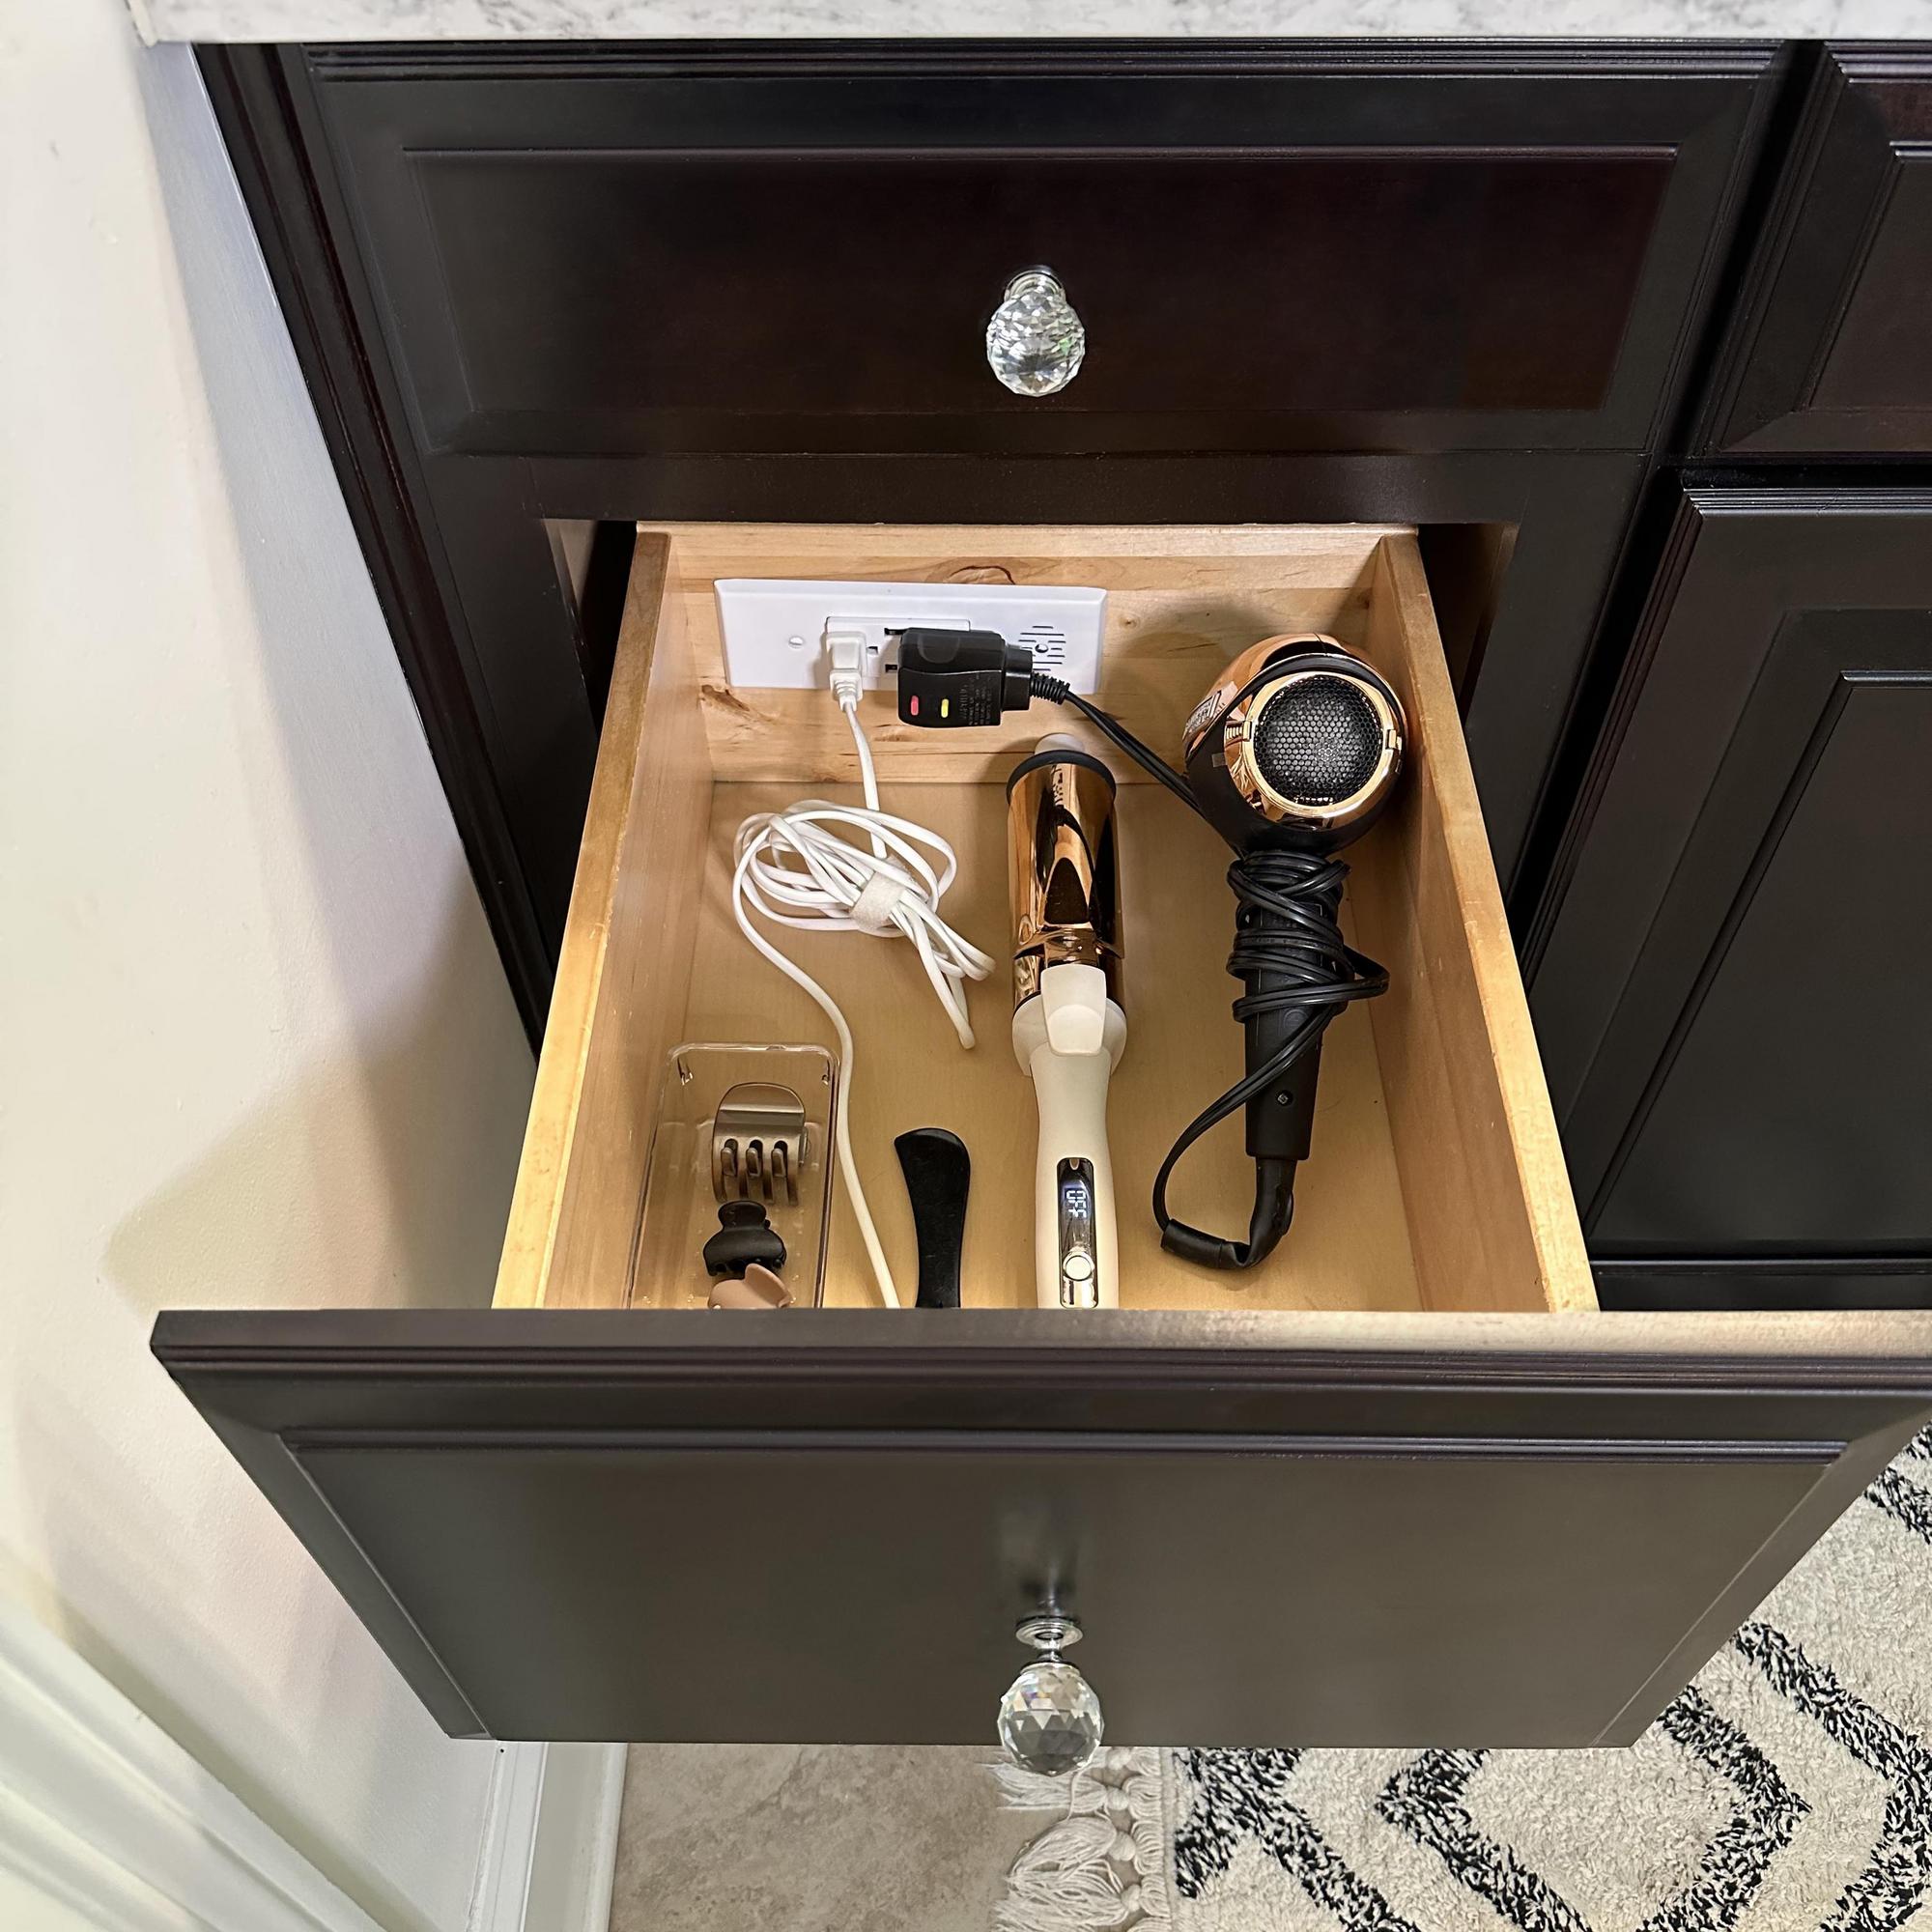 A hair dryer and a curling iron neatly stored in a bathroom vanity drawer, powered by a Docking Drawer Blade in-drawer outlet.